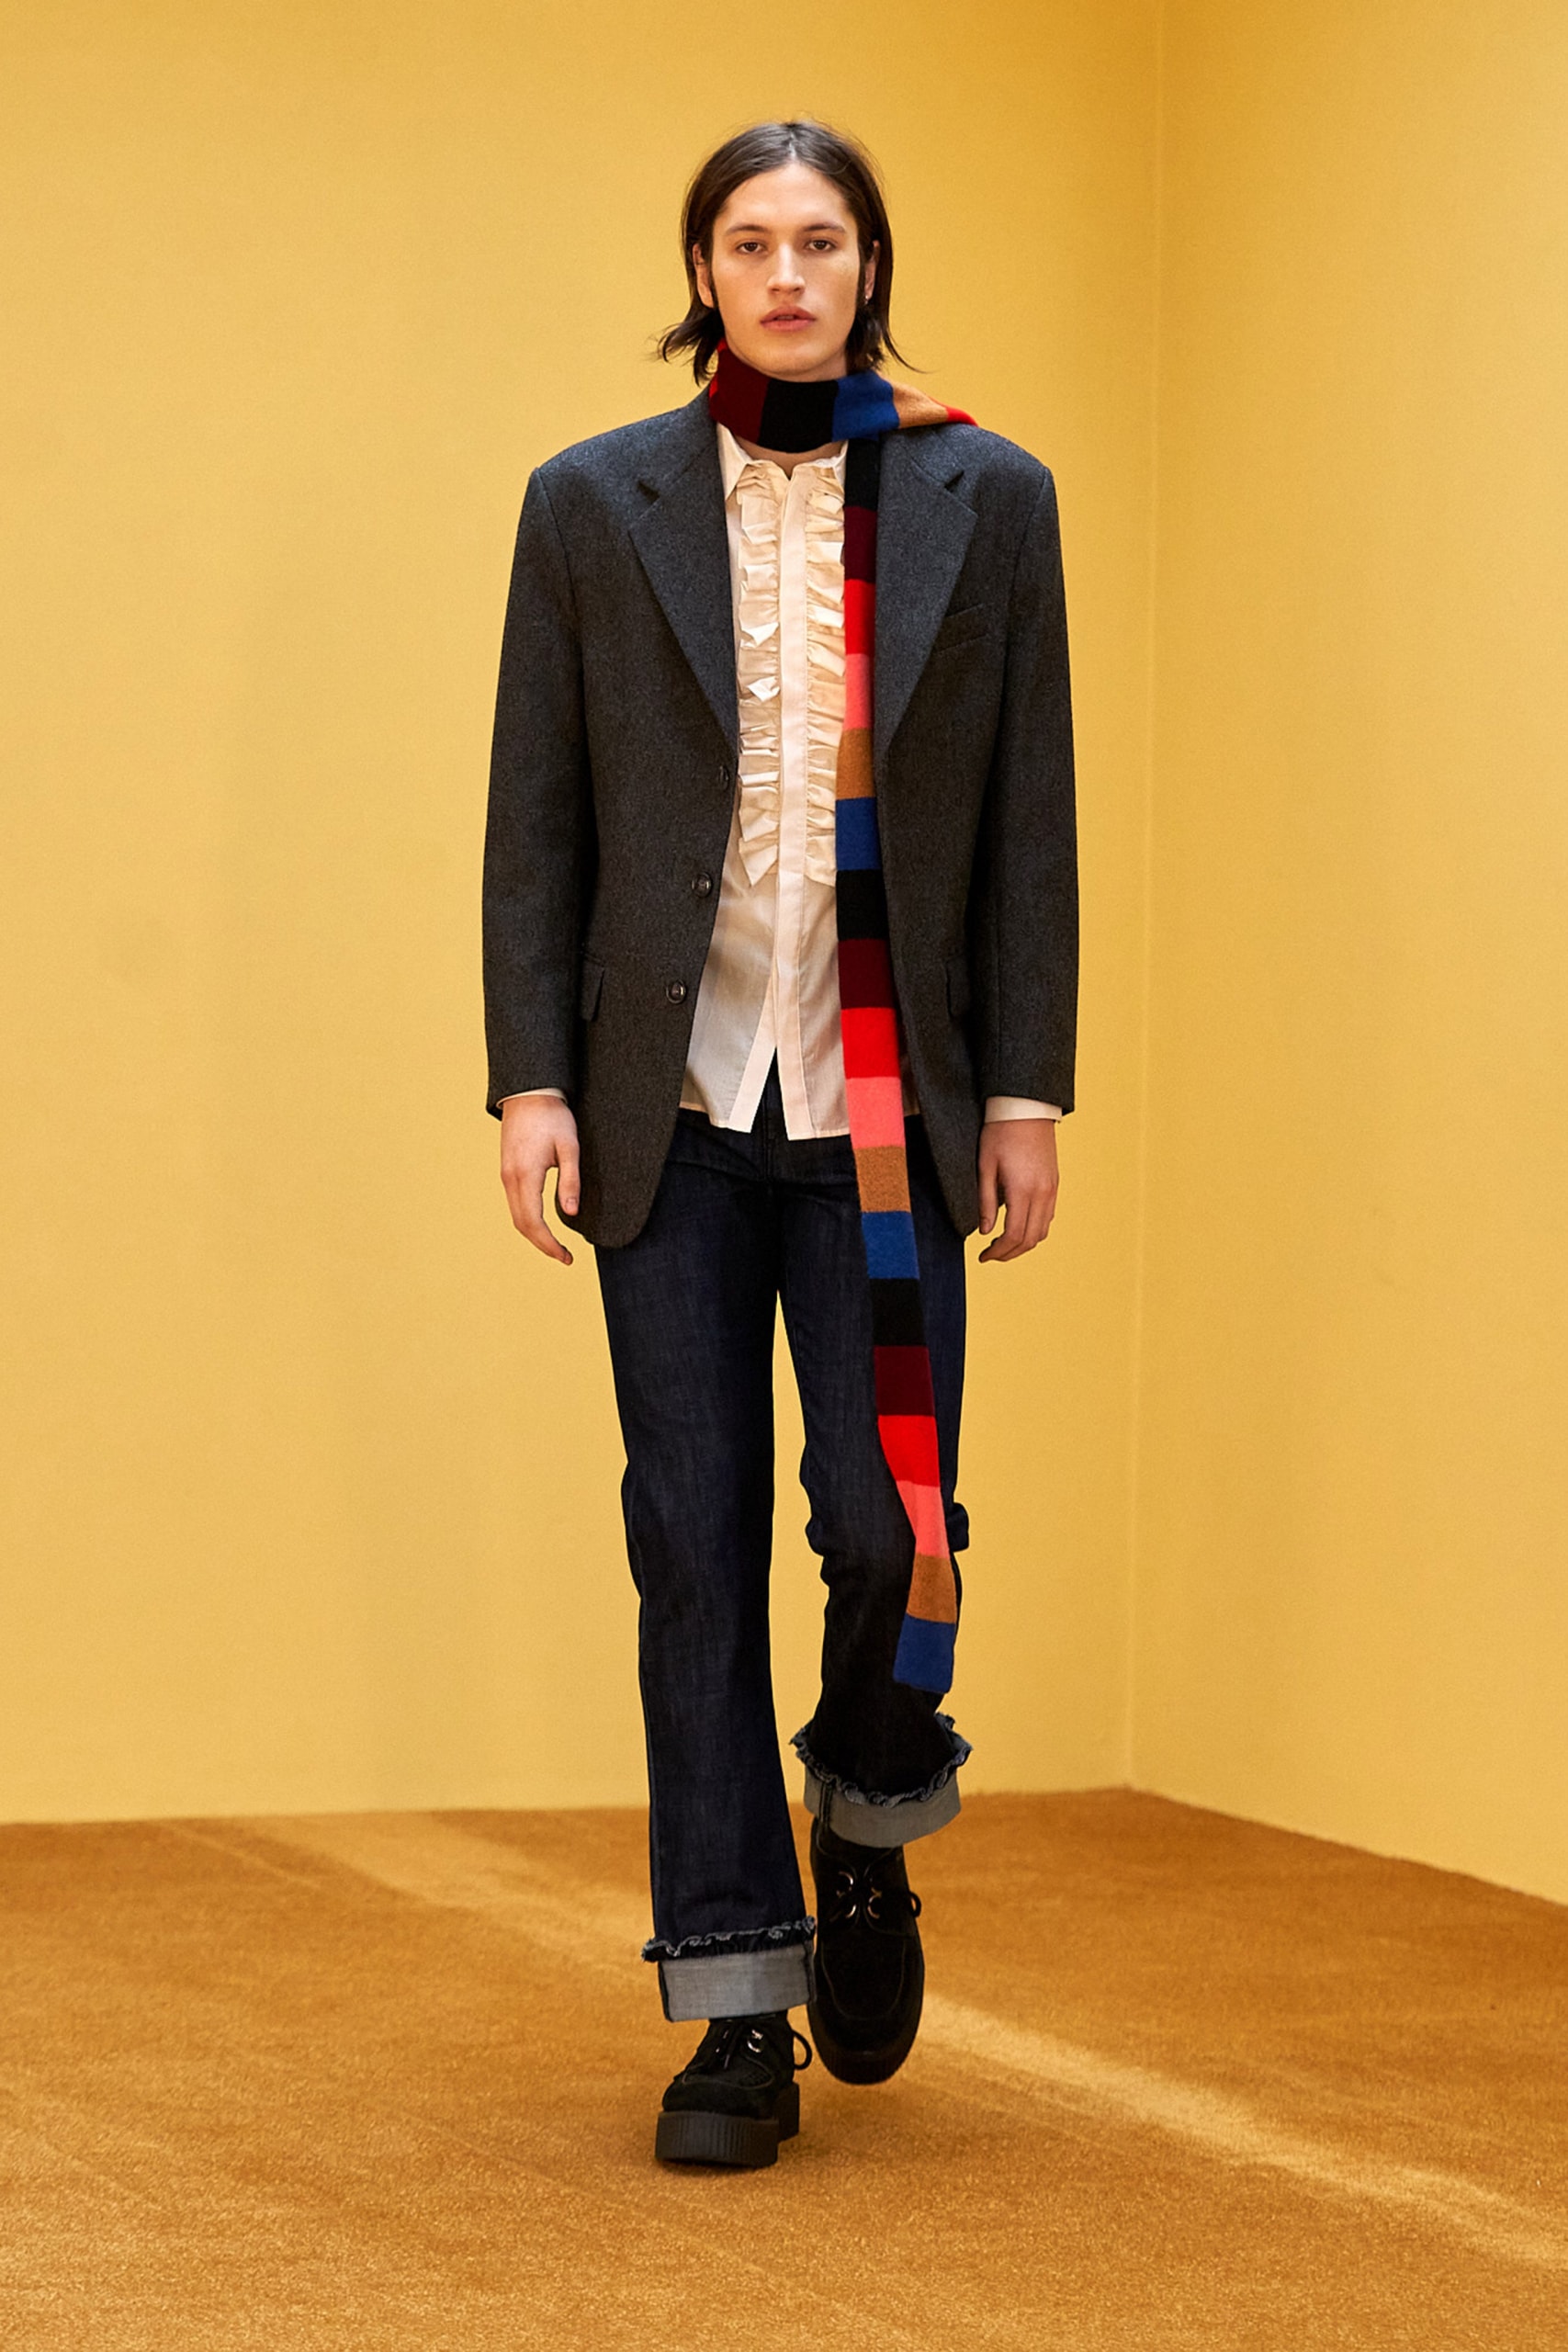 molly goddard fall winter 2021 fw21 collection london fashion week lfw mens suit jacket trousers jeans